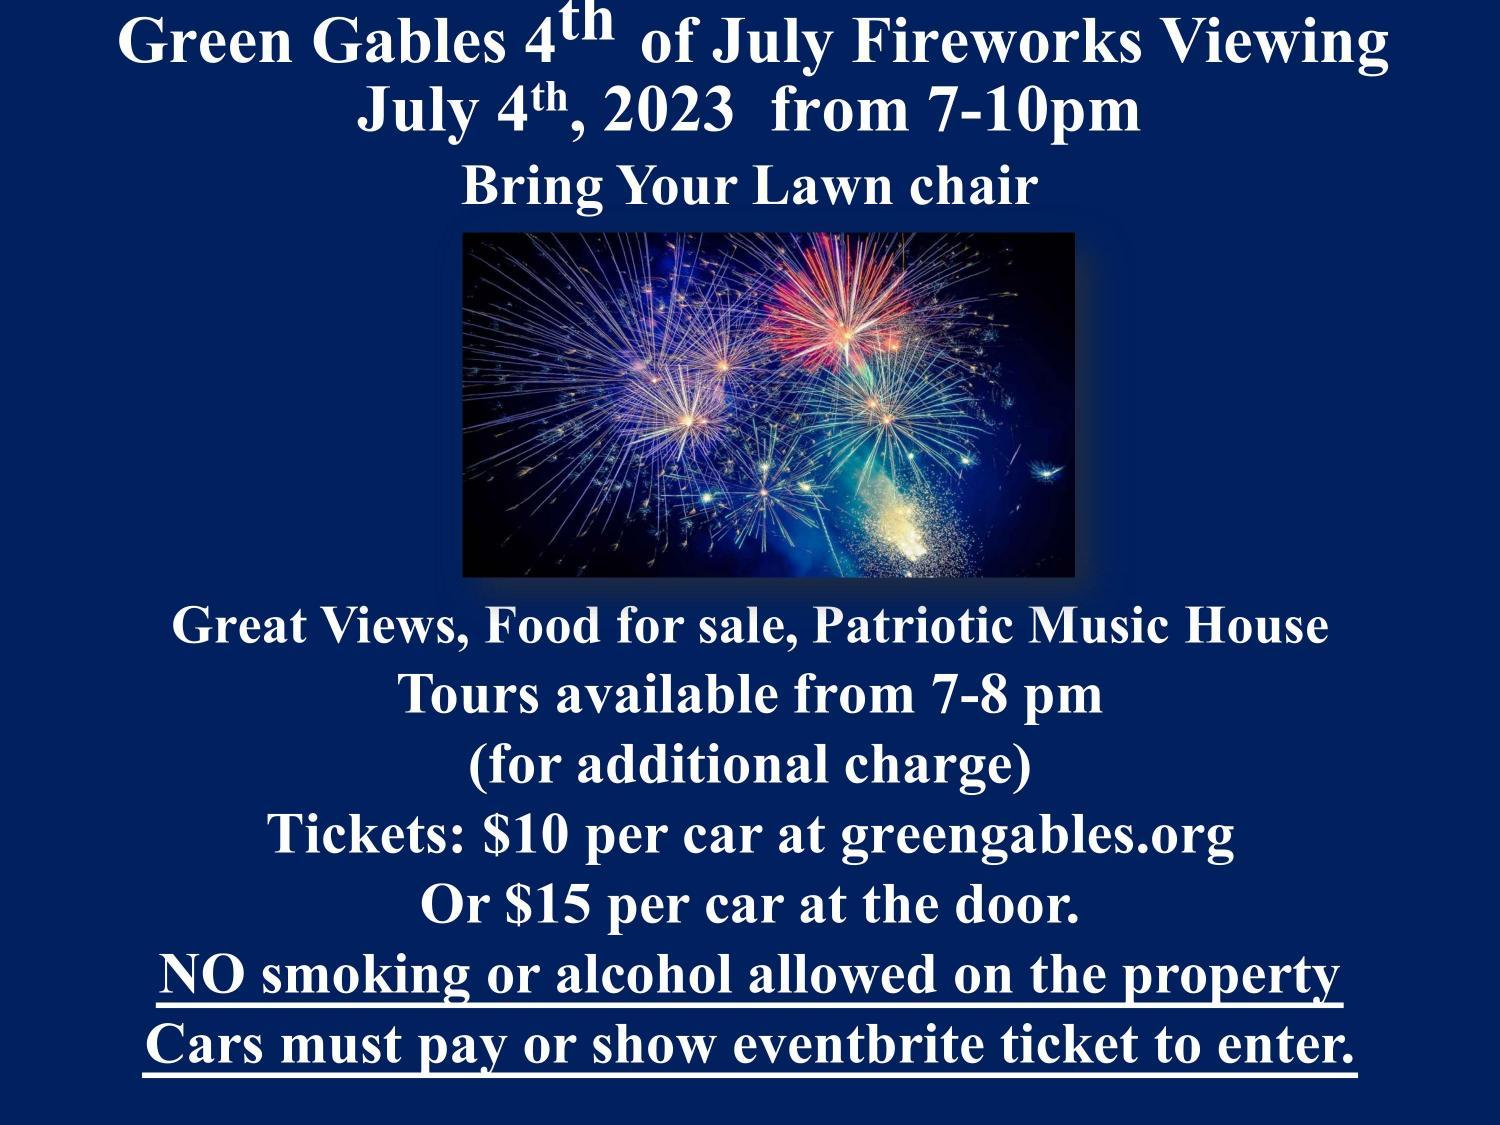 Green Gables 4th of July Viewing Event